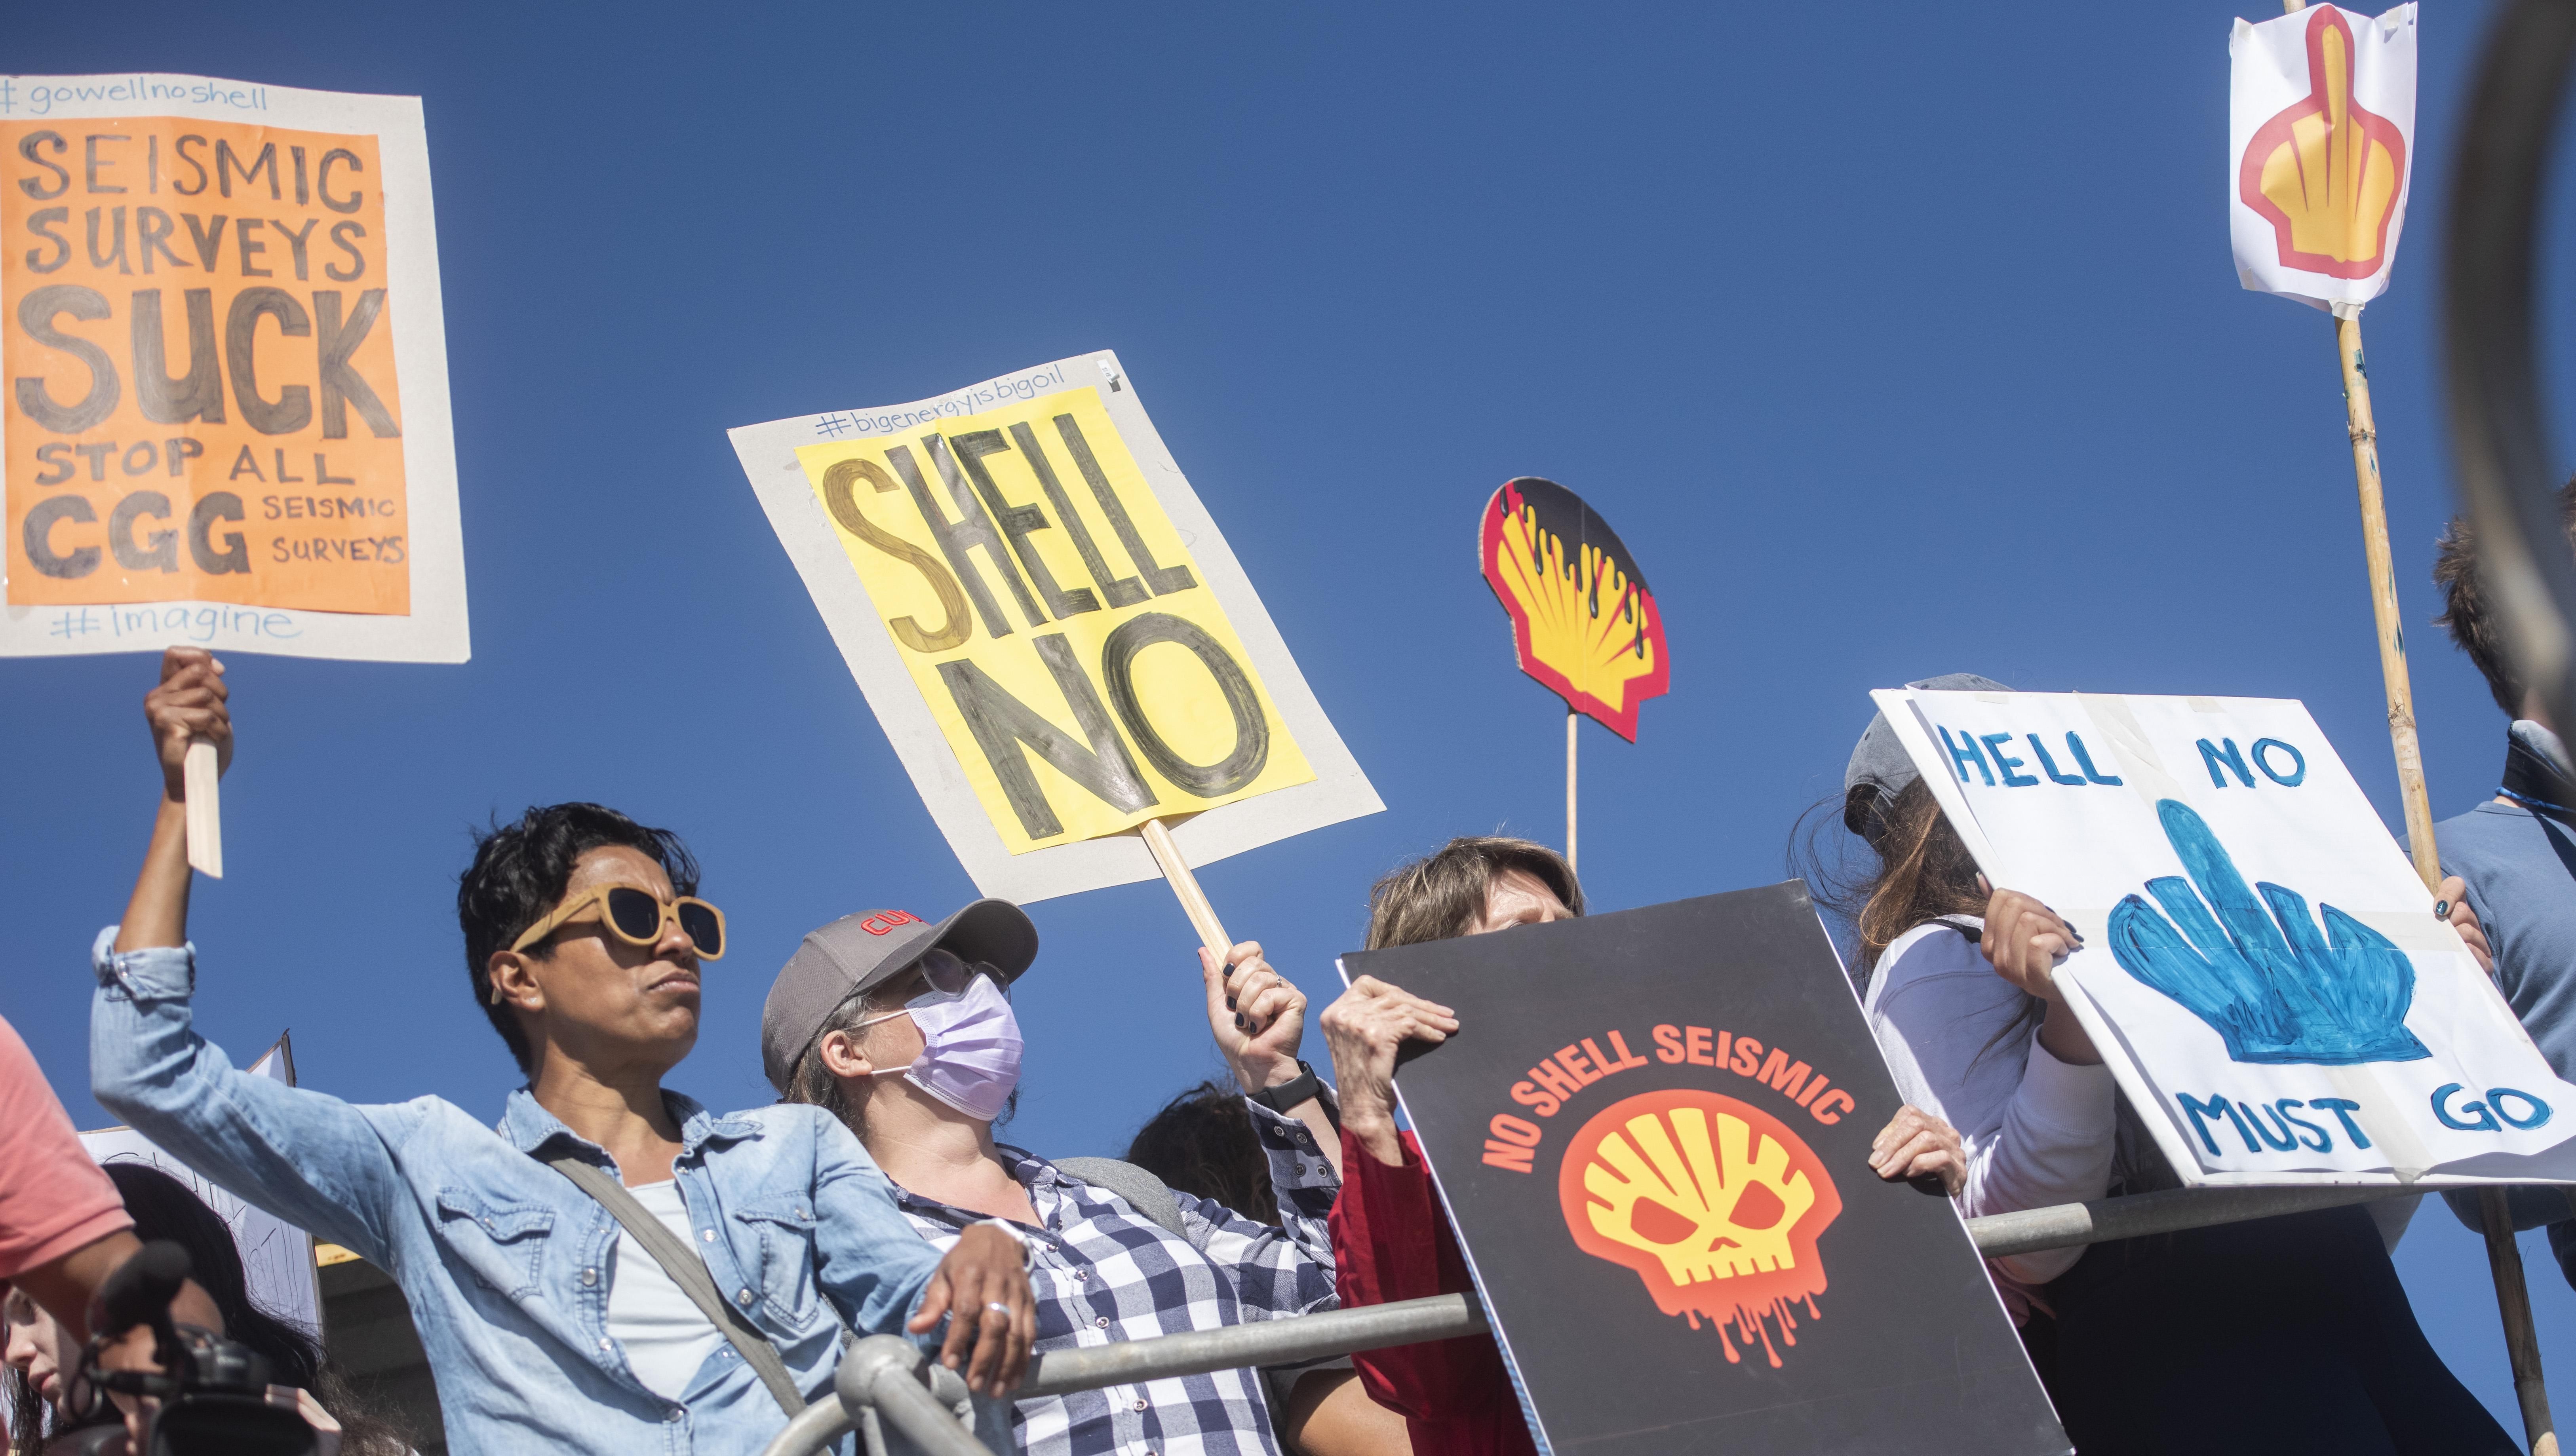 Opponents of Shell's planned seismic blasting protest on November 21, 2021 in Cape Town, South Africa